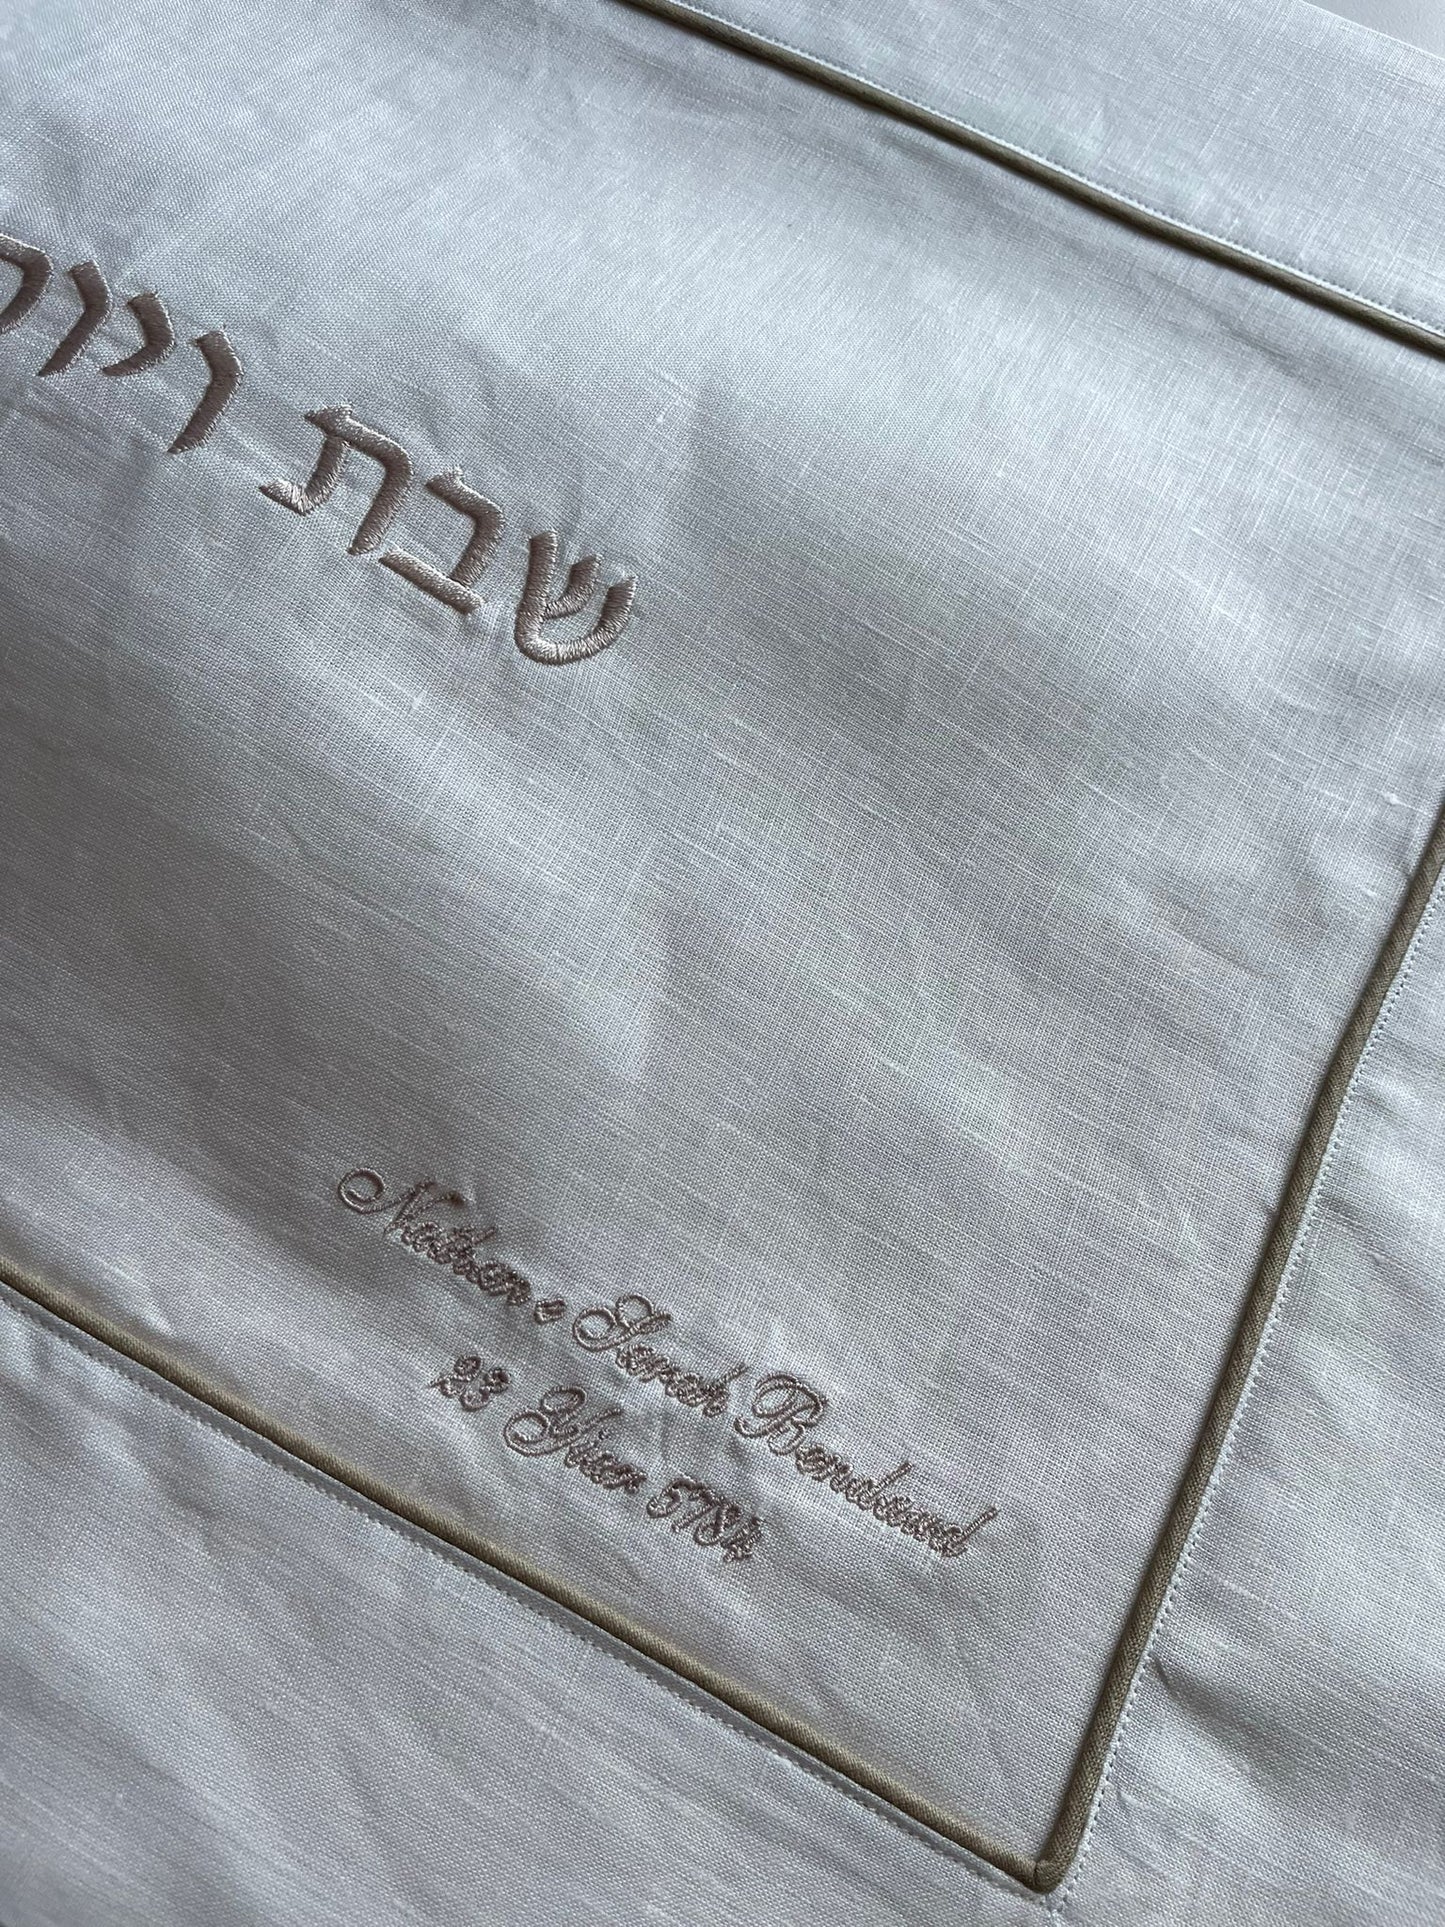 Beige Challah Cover Shabat Shalom text customized